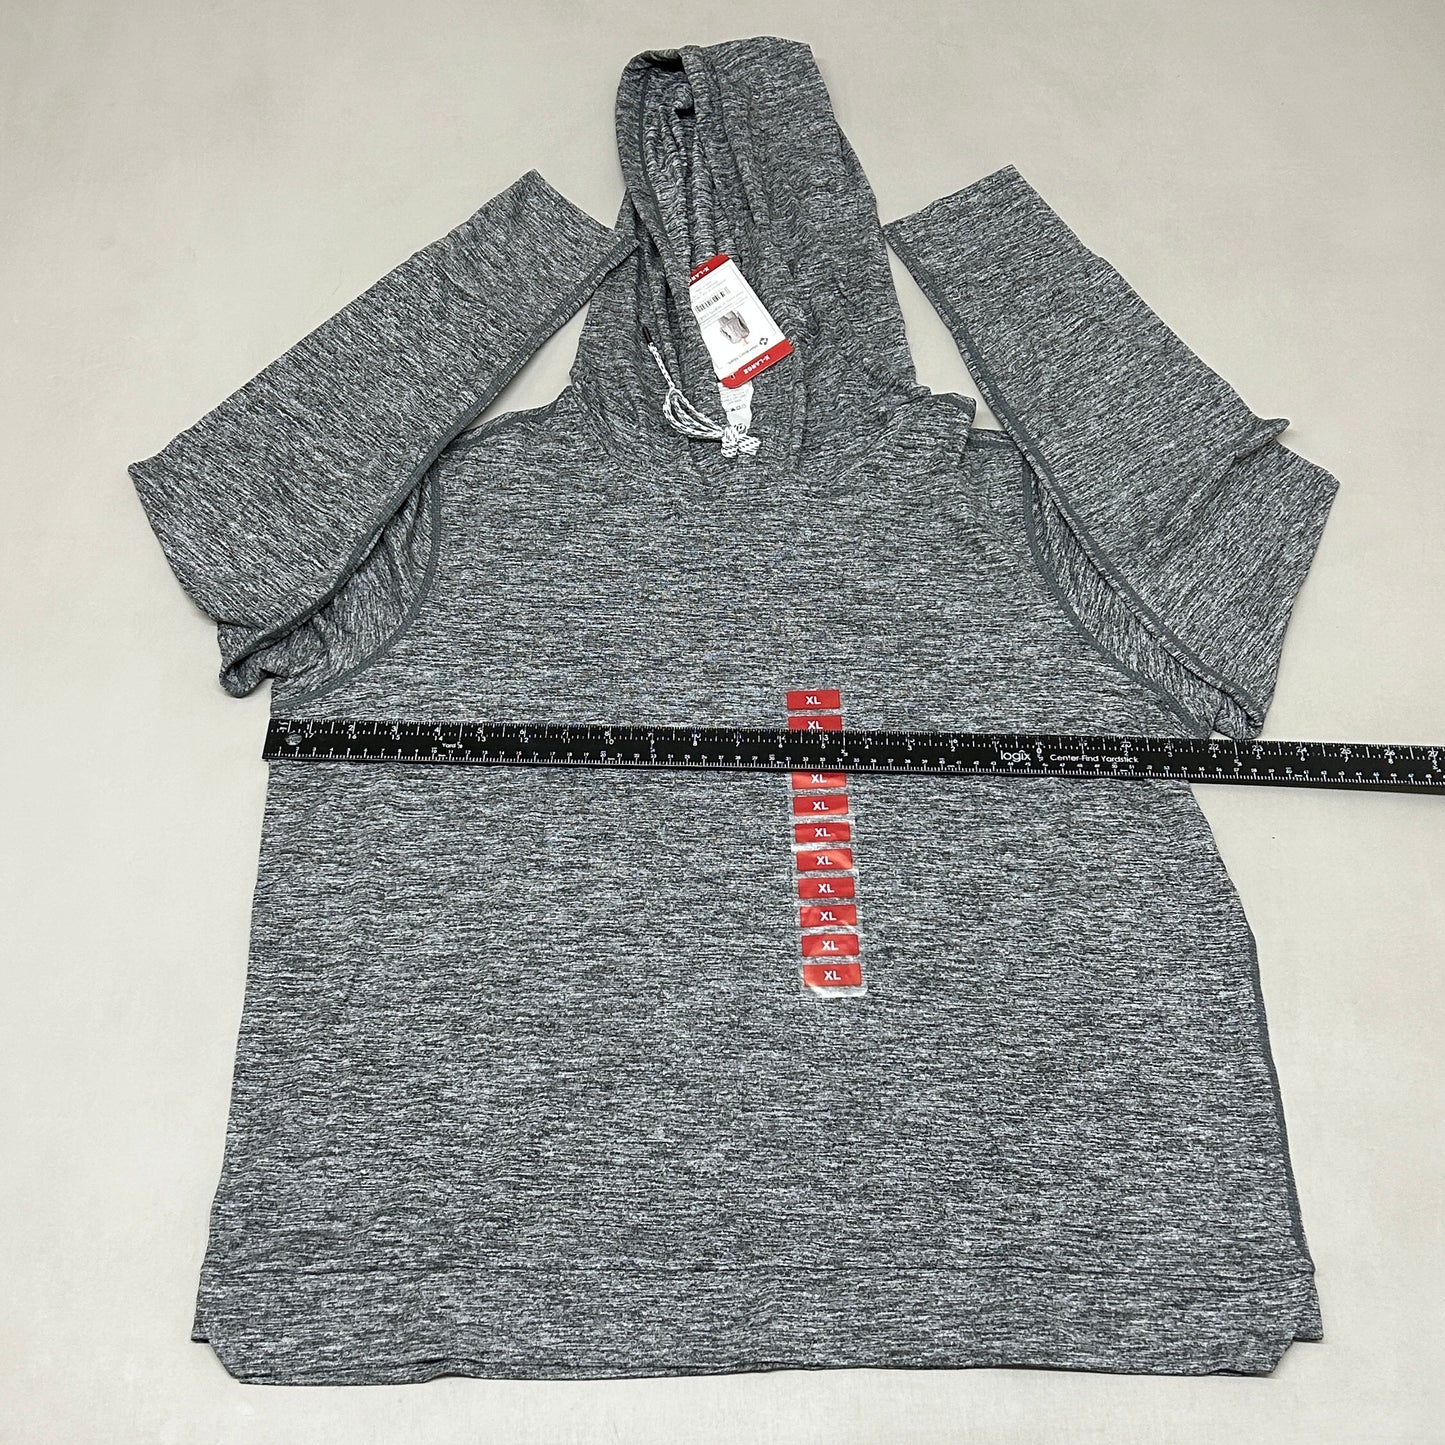 MEMBERS MARK Favorite Soft Pullover Heather Grey Size X-Large (New)